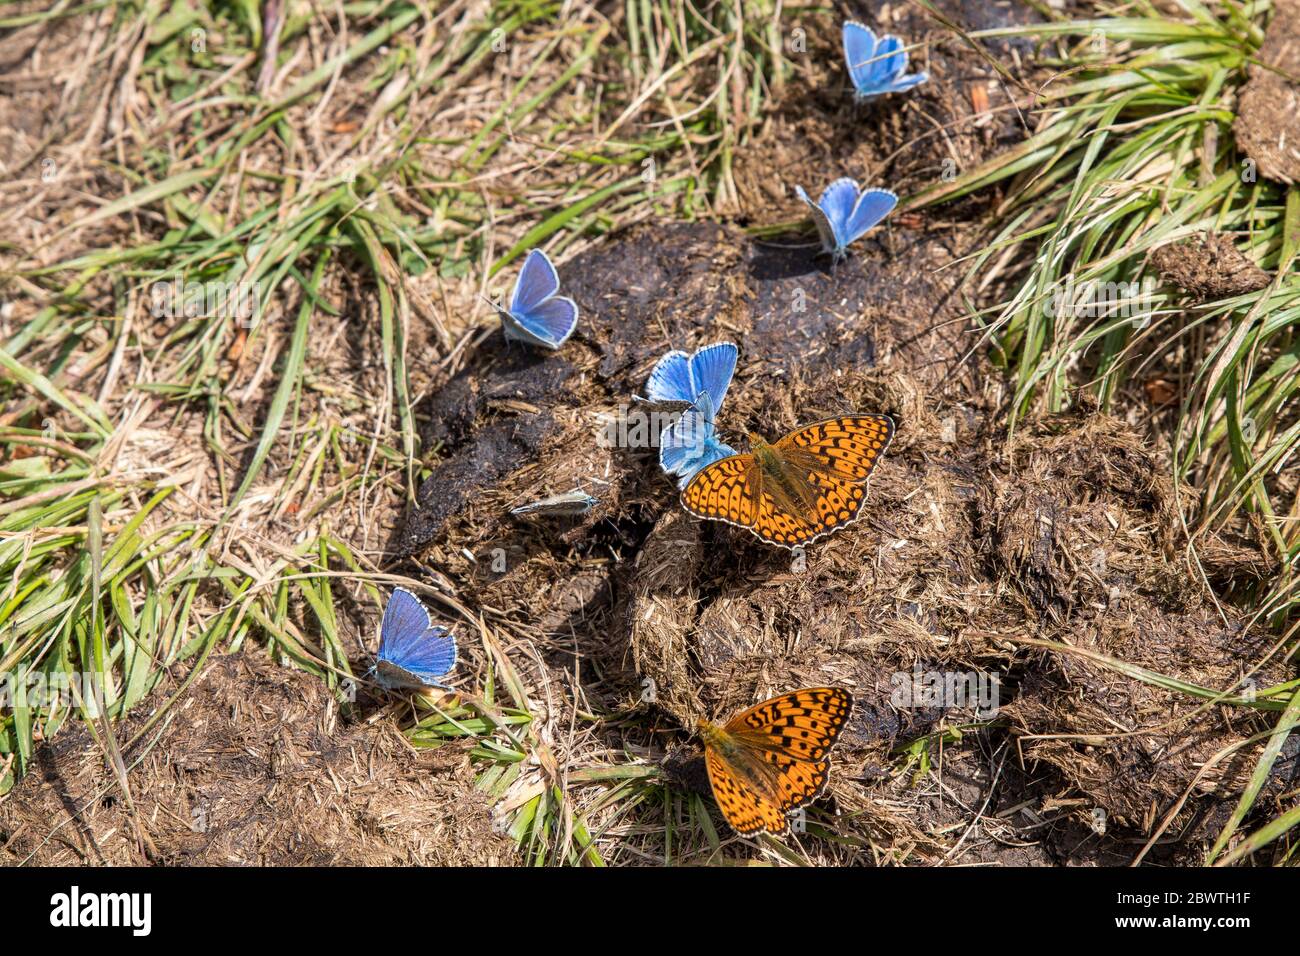 Lycaenidae butterfly (little blue butterfly) sitting on the groun in sunny summer day Stock Photo